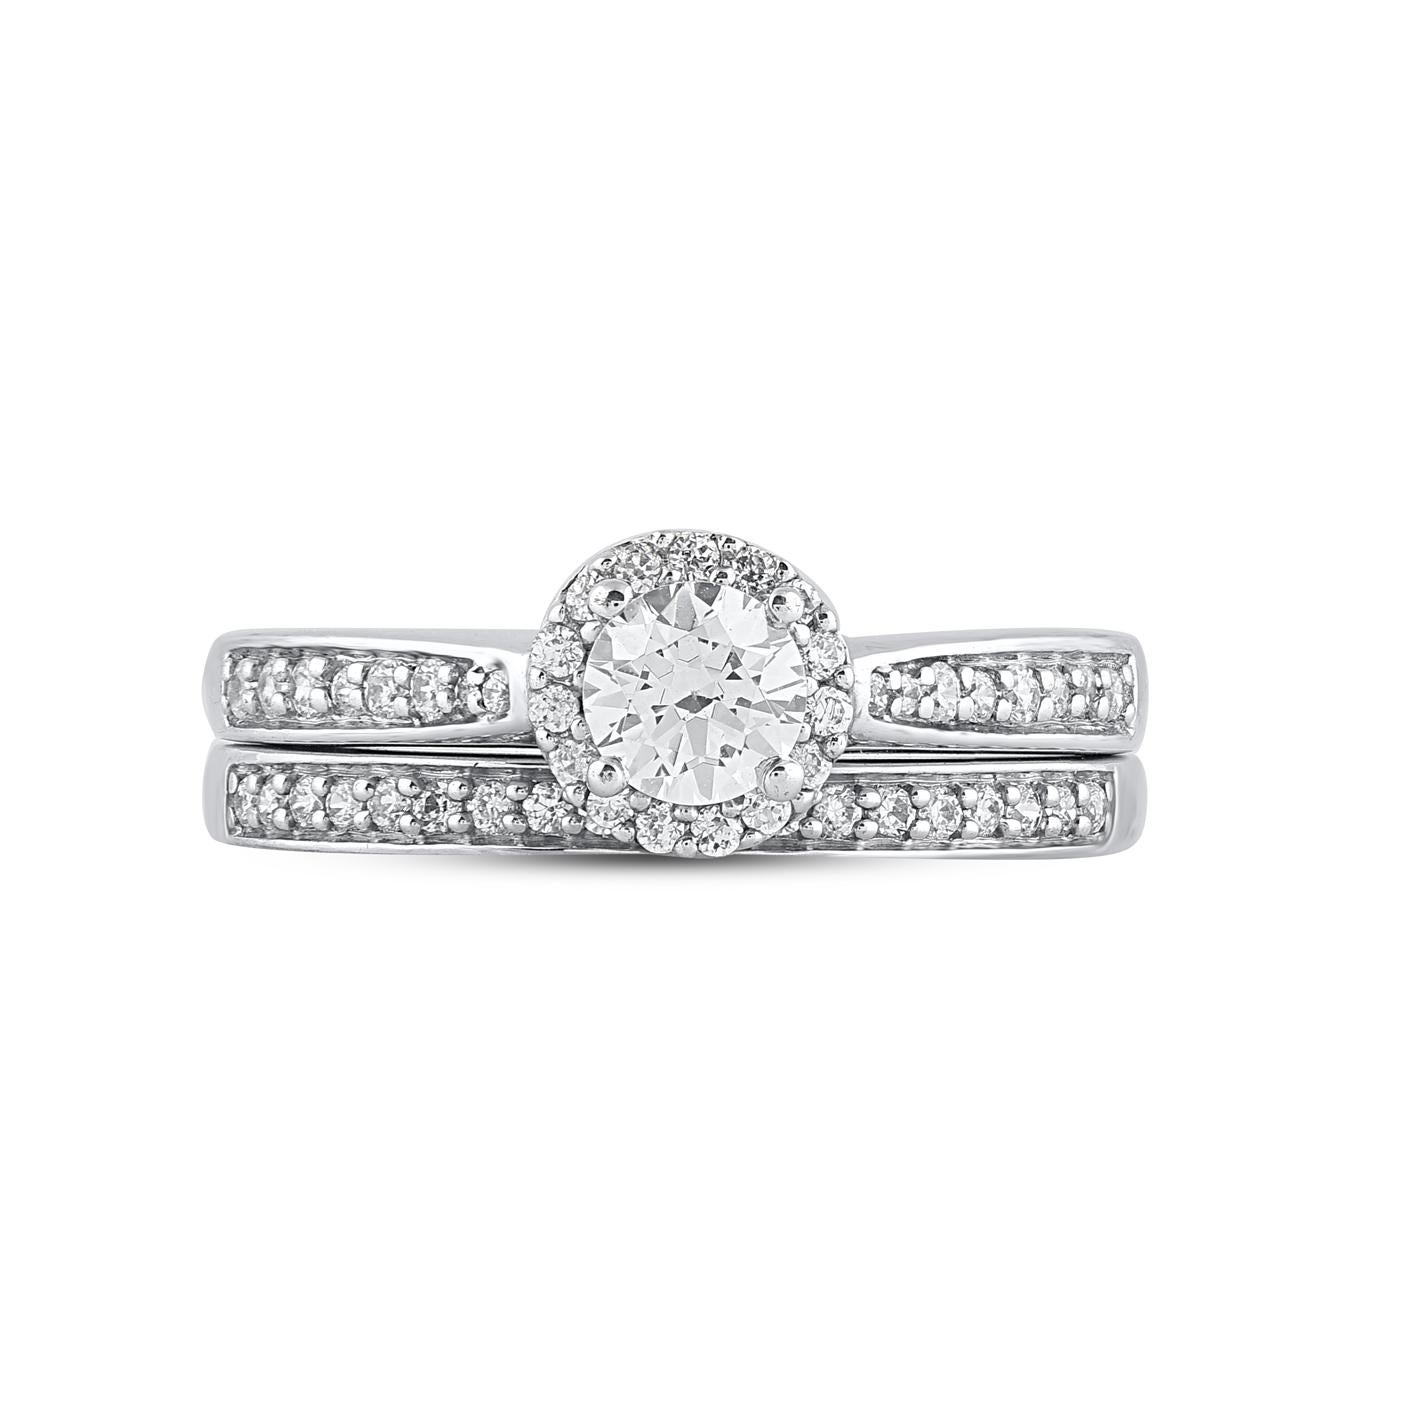 Win her heart with this classic and elegant diamond ring. Crafted in 14 Karat white gold, the engagement ring features a sparkling 51 single cut & brilliant cut diamond beautifully set in prong & pave setting. The total diamond weight is 0.75 Carat.